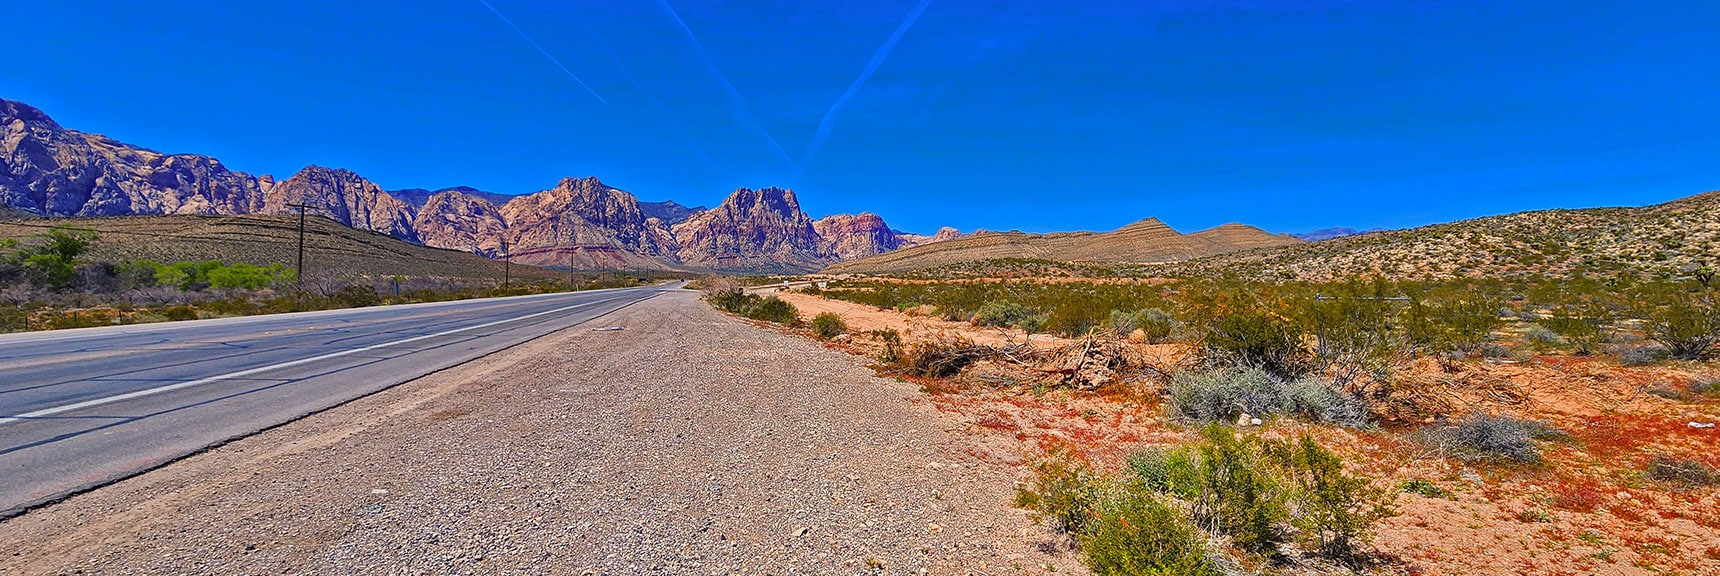 Now on Hwy 159. Short Quarter-Mile Return to Starting Point at Wheeler Spring Camp Parking! | Blue Diamond Hill Southern Ridgelines | Red Rock Canyon, Nevada